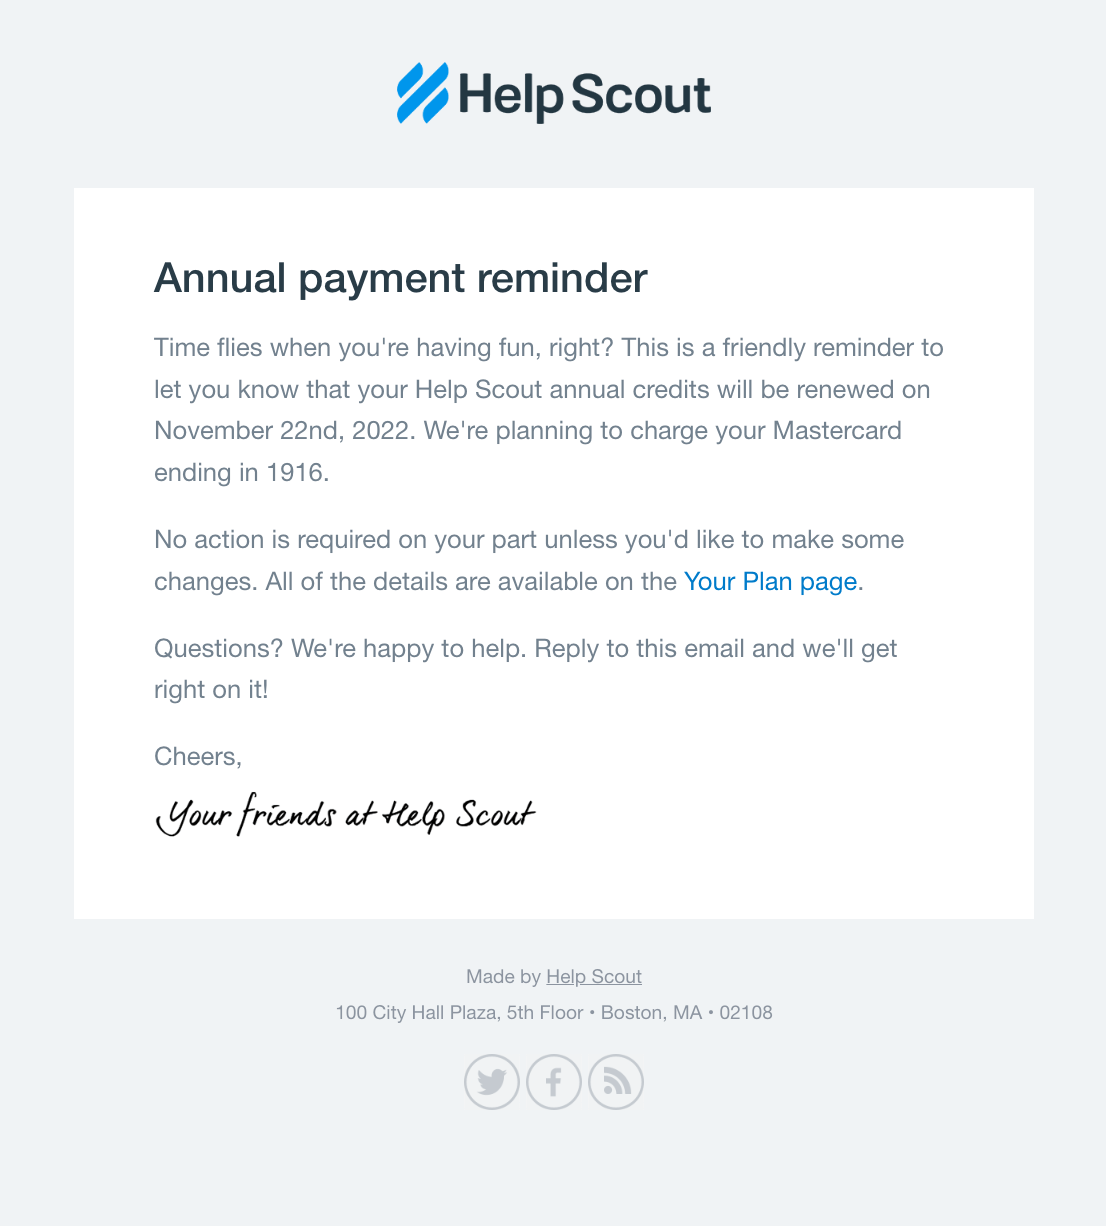 How to write a friendly reminder email